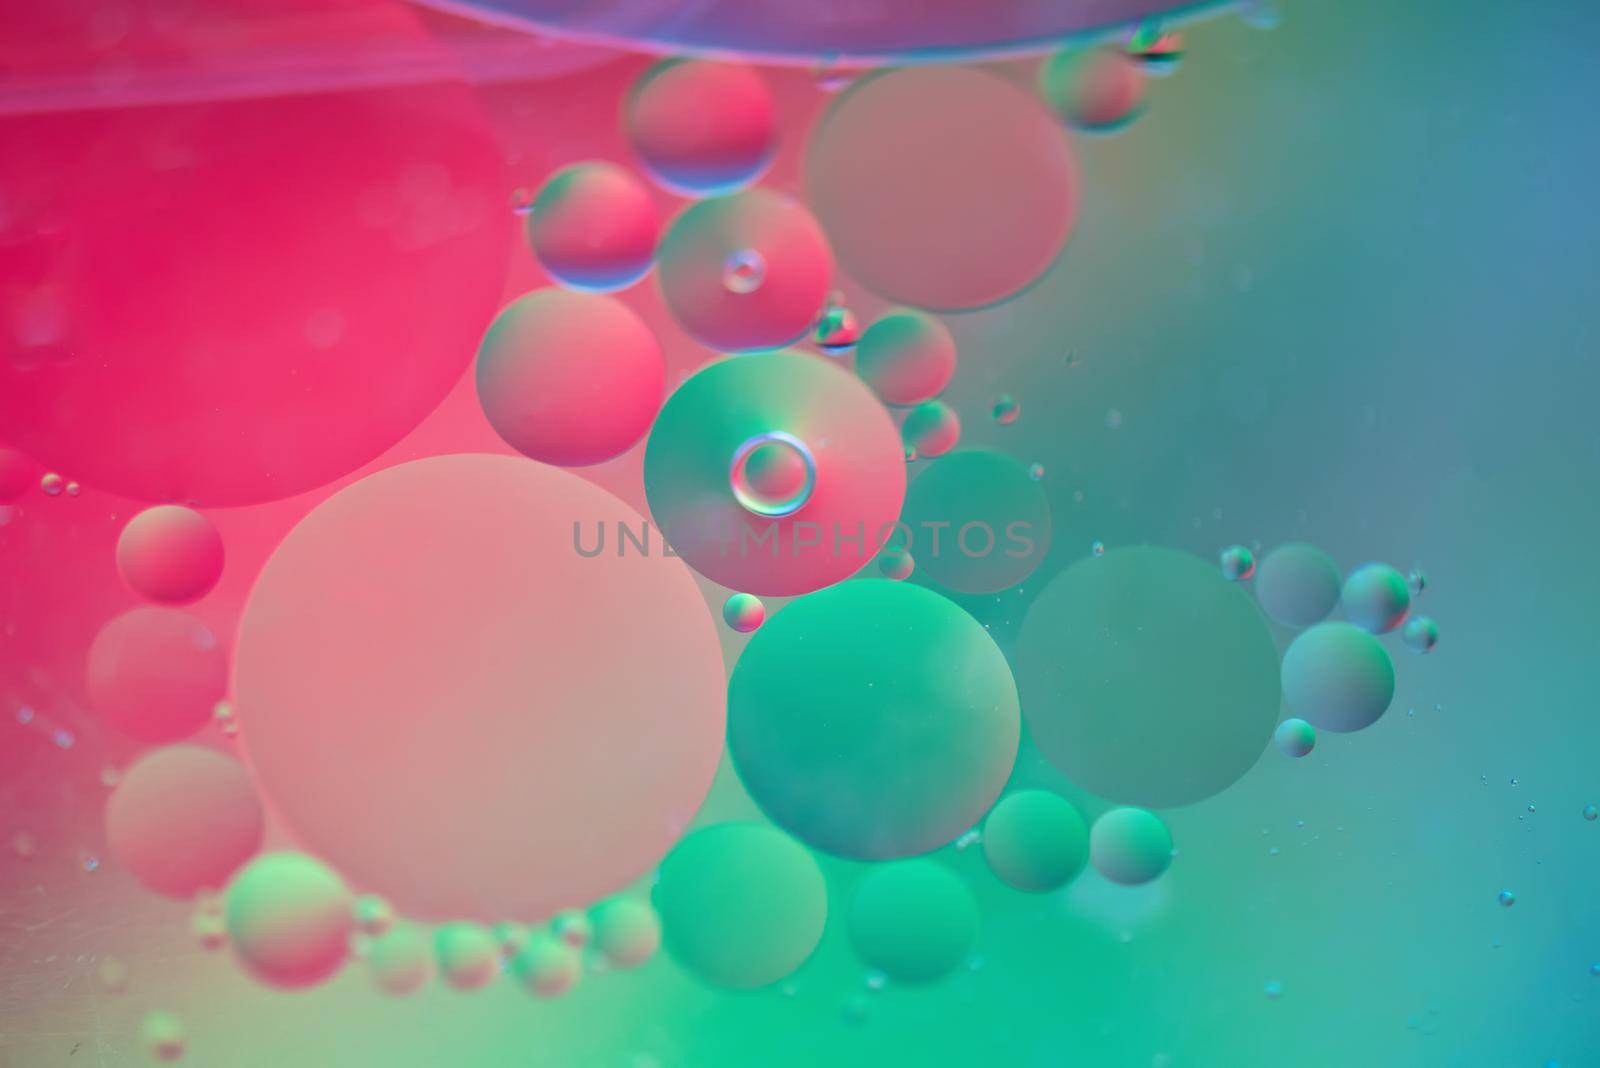 Oil drops in water. Abstract defocused psychedelic pattern image red and green colored. Abstract background with colorful gradient colors. DOF